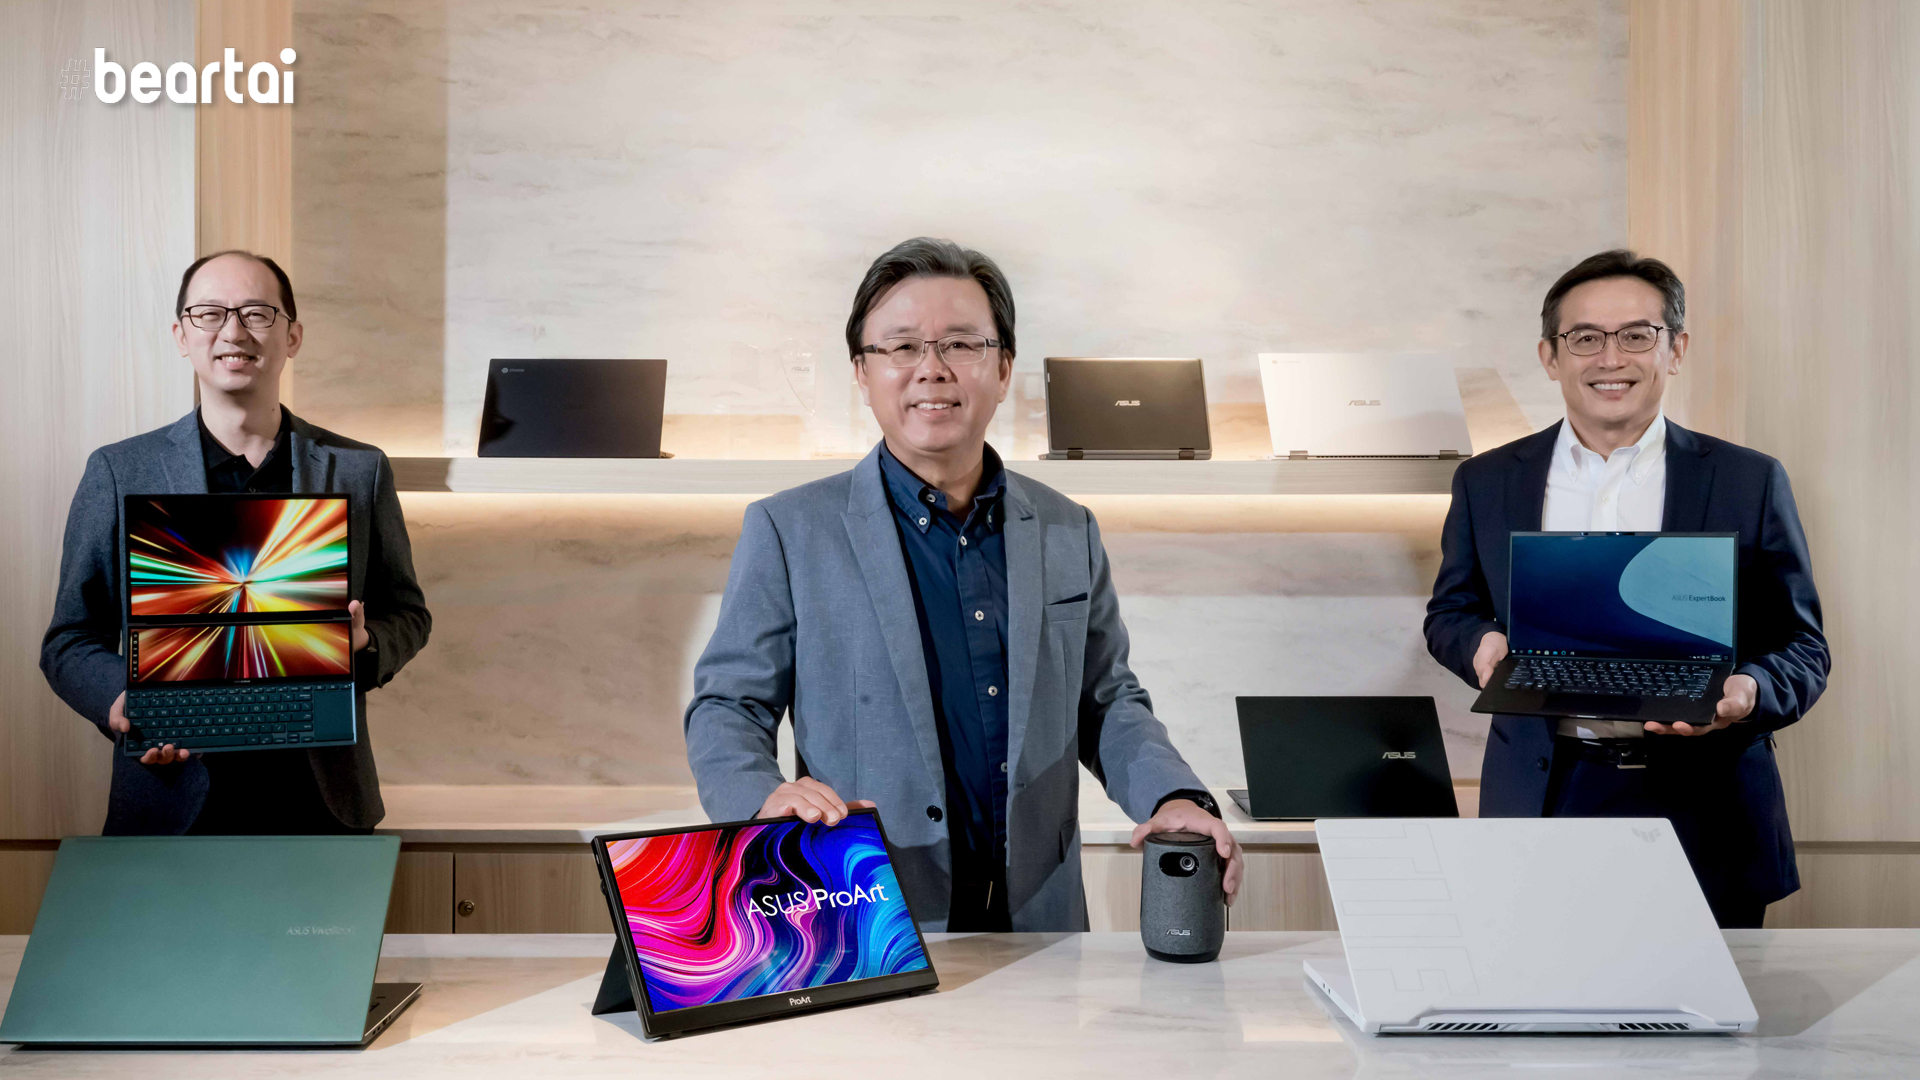 Asus unveils newest laptops at CES 2021 'Go Ahead' event led by Zenbook, VivoBook and ExpertBook.

